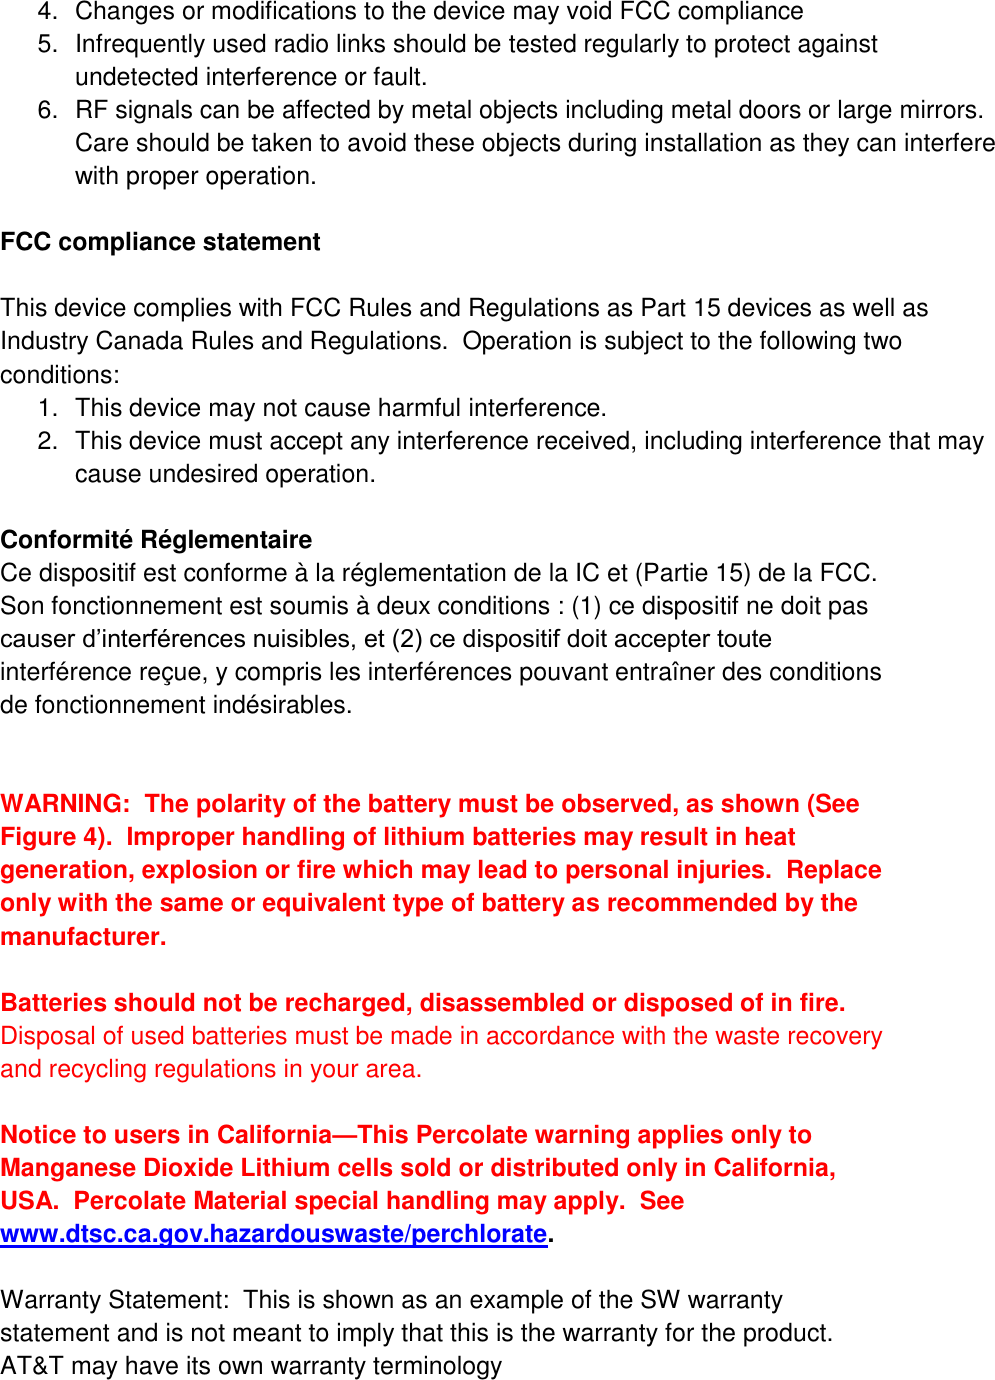 4.  Changes or modifications to the device may void FCC compliance 5.  Infrequently used radio links should be tested regularly to protect against undetected interference or fault. 6.  RF signals can be affected by metal objects including metal doors or large mirrors.  Care should be taken to avoid these objects during installation as they can interfere with proper operation.  FCC compliance statement  This device complies with FCC Rules and Regulations as Part 15 devices as well as Industry Canada Rules and Regulations.  Operation is subject to the following two conditions: 1.  This device may not cause harmful interference. 2.  This device must accept any interference received, including interference that may cause undesired operation.  Conformité Réglementaire Ce dispositif est conforme à la réglementation de la IC et (Partie 15) de la FCC. Son fonctionnement est soumis à deux conditions : (1) ce dispositif ne doit pas causer d’interférences nuisibles, et (2) ce dispositif doit accepter toute interférence reçue, y compris les interférences pouvant entraîner des conditions de fonctionnement indésirables.   WARNING:  The polarity of the battery must be observed, as shown (See Figure 4).  Improper handling of lithium batteries may result in heat generation, explosion or fire which may lead to personal injuries.  Replace only with the same or equivalent type of battery as recommended by the manufacturer.    Batteries should not be recharged, disassembled or disposed of in fire.  Disposal of used batteries must be made in accordance with the waste recovery and recycling regulations in your area.  Notice to users in California—This Percolate warning applies only to Manganese Dioxide Lithium cells sold or distributed only in California, USA.  Percolate Material special handling may apply.  See www.dtsc.ca.gov.hazardouswaste/perchlorate.   Warranty Statement:  This is shown as an example of the SW warranty statement and is not meant to imply that this is the warranty for the product.  AT&amp;T may have its own warranty terminology  